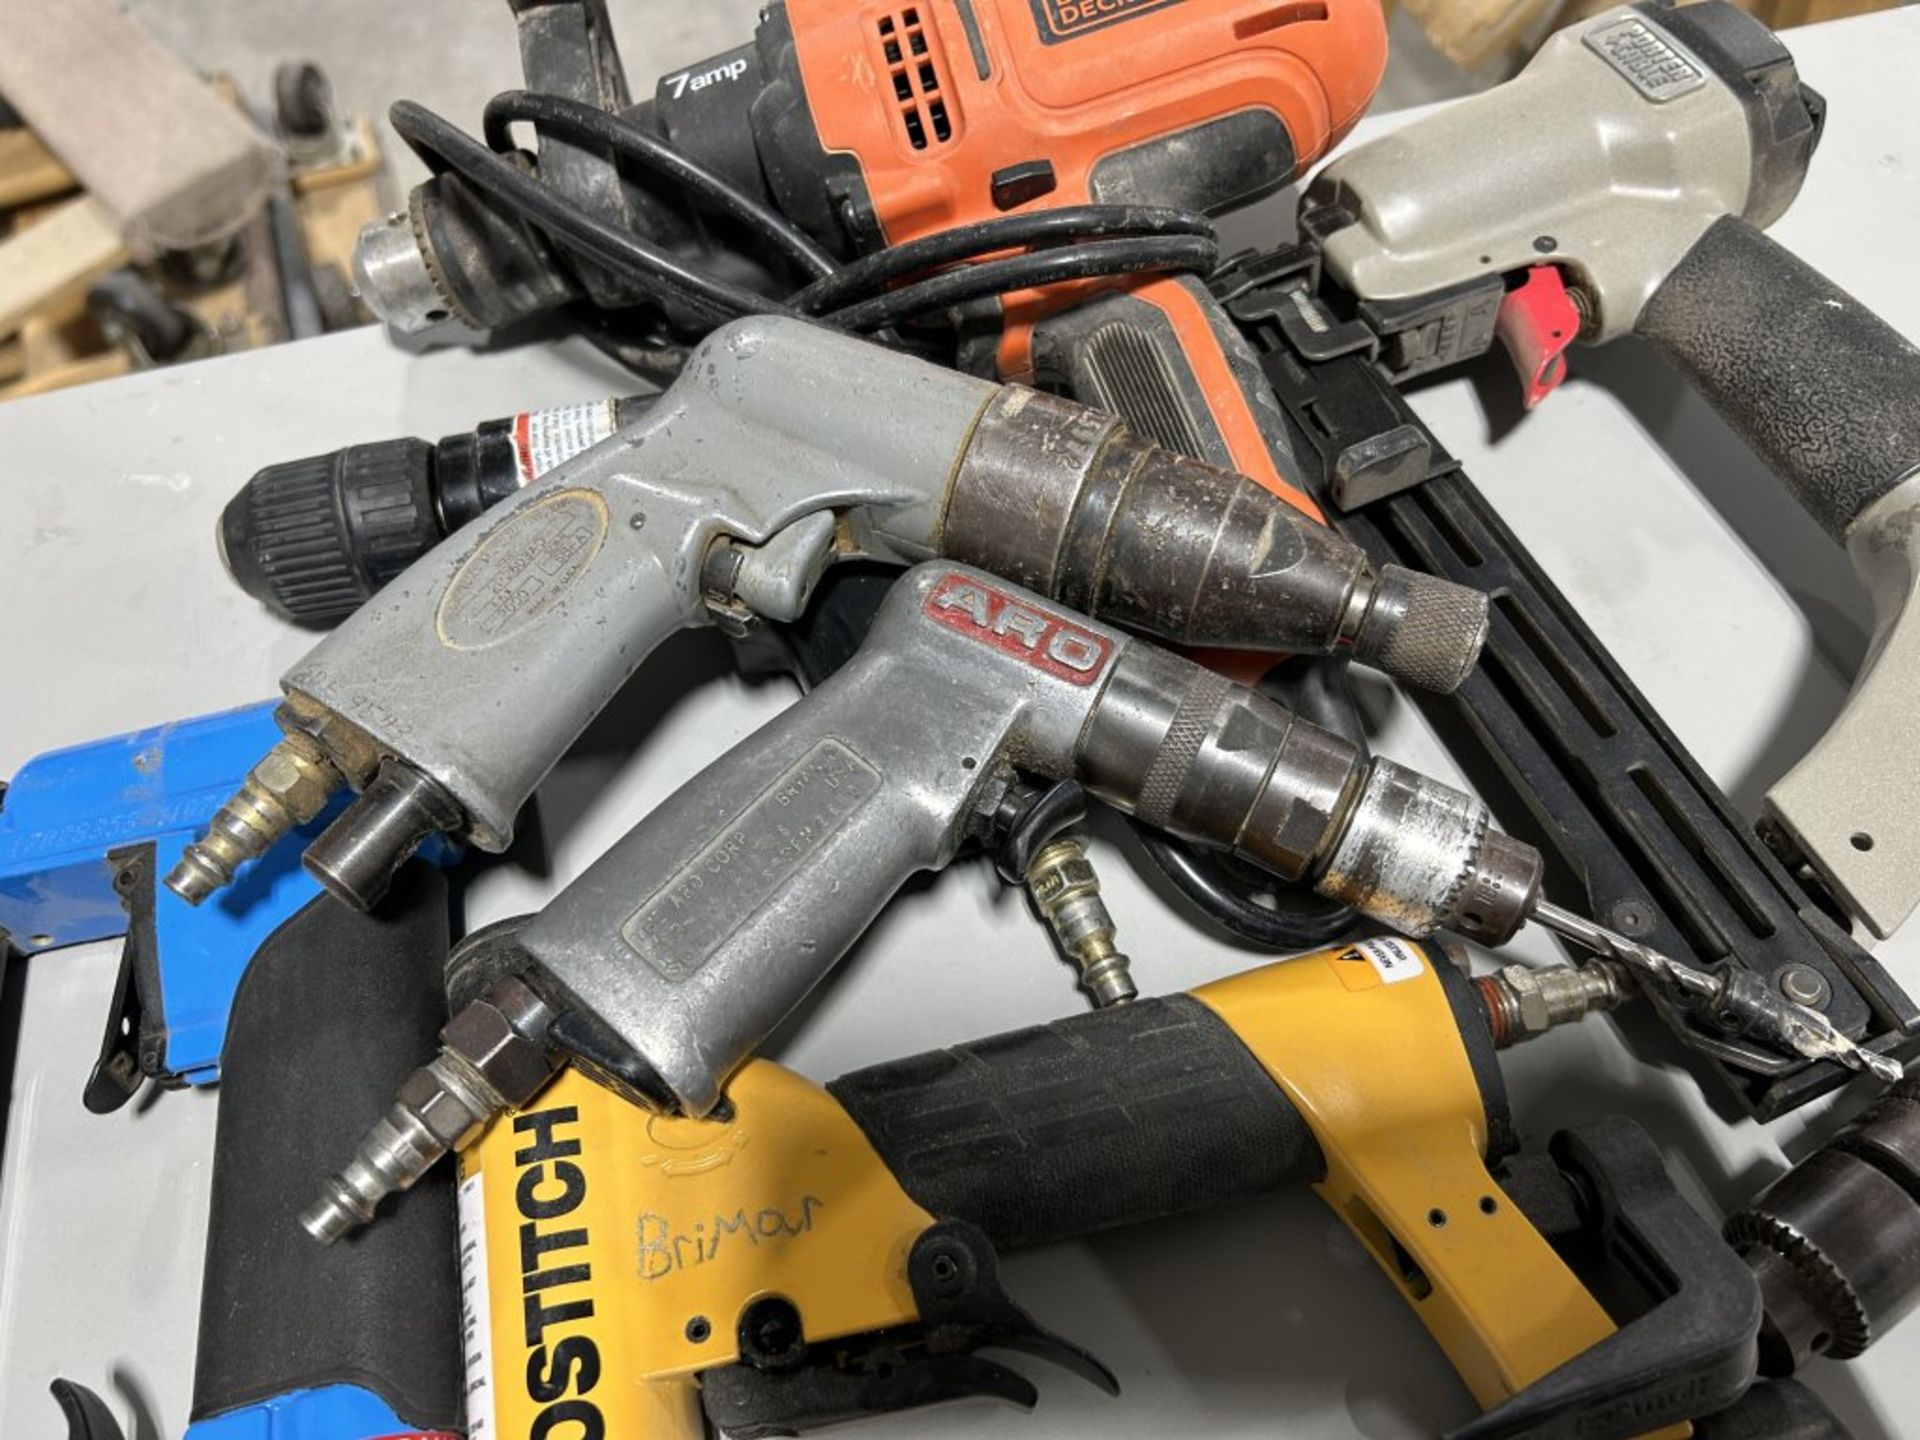 LOT OF ASSORTED PNEUMATIC NAILERS, DRILLS, BLACK & DECKER CORDED 7-AMP DRILL - Image 2 of 6